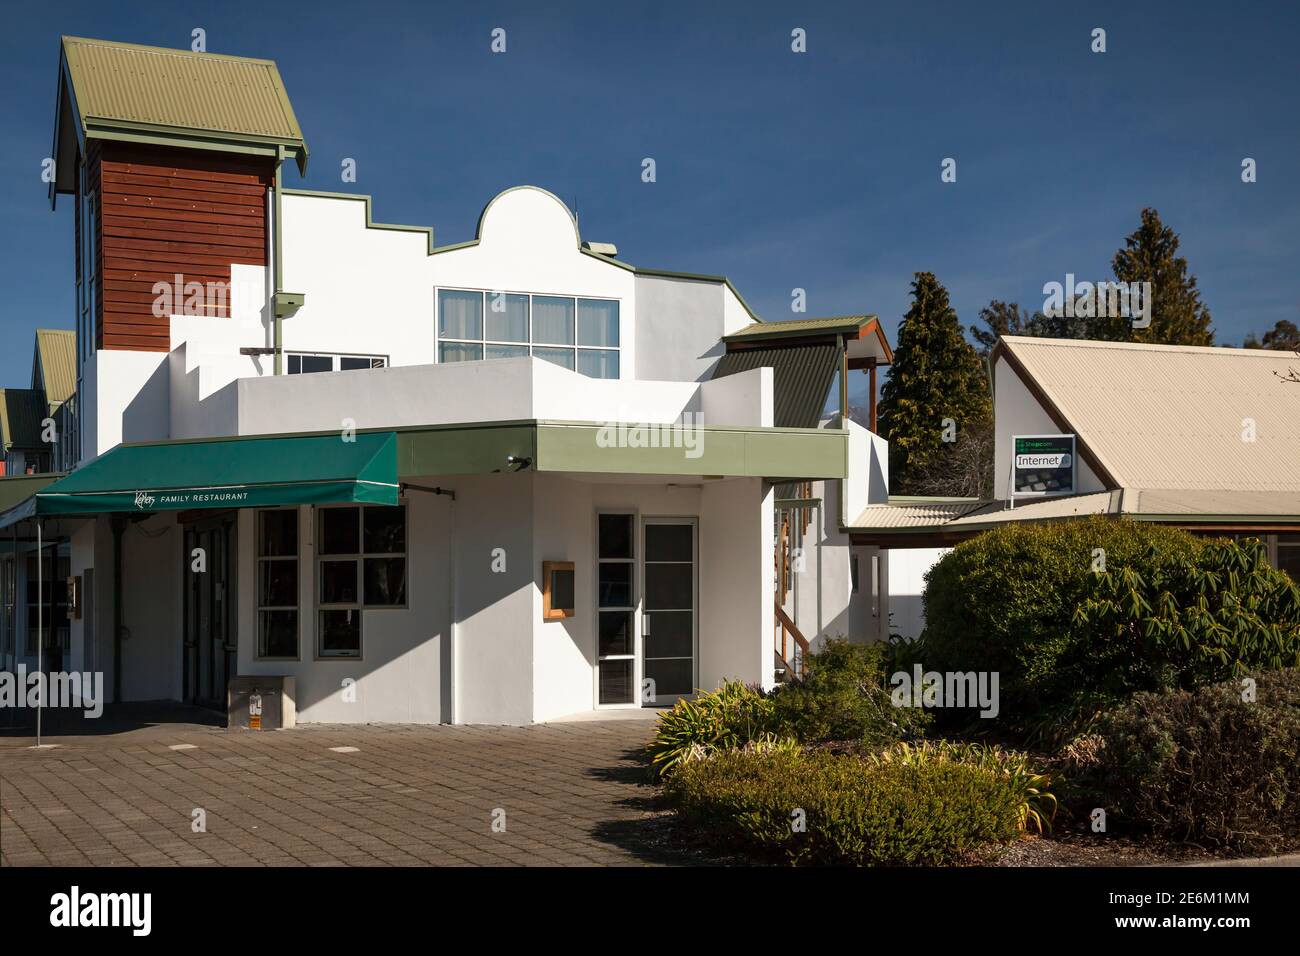 Horizontal shot of a colorful family restaurant exterior on a sunny day, Te Anau, South Island, New Zealand Stock Photo